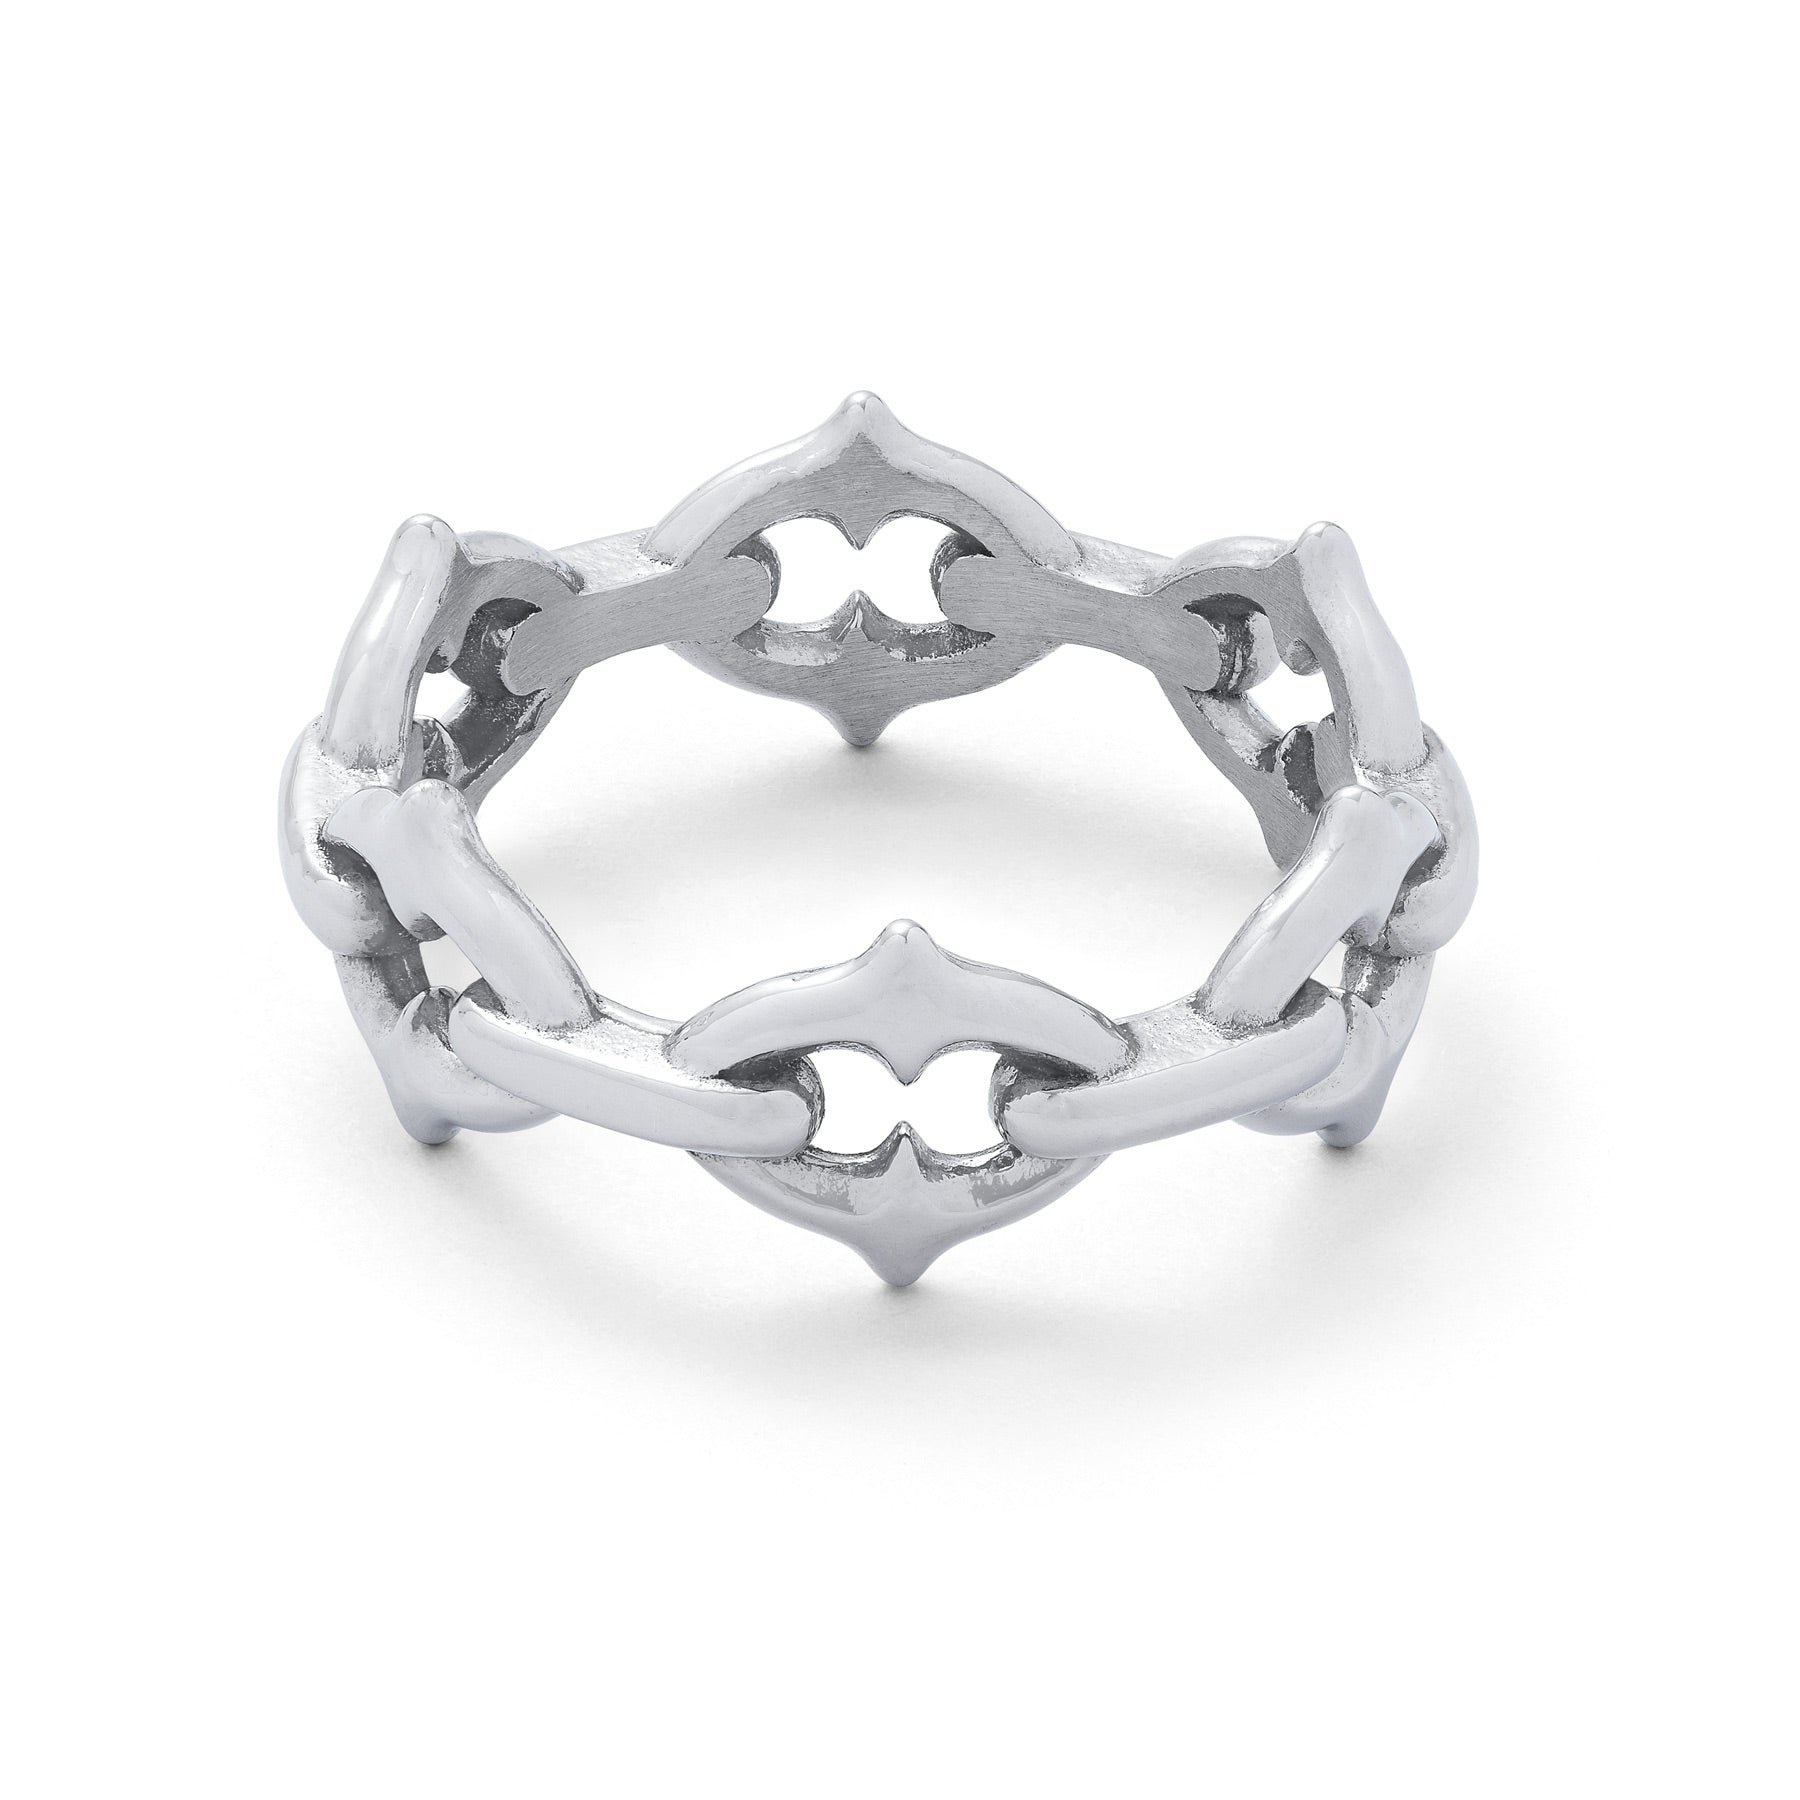 Unisex spiked chain ring in stainless steel